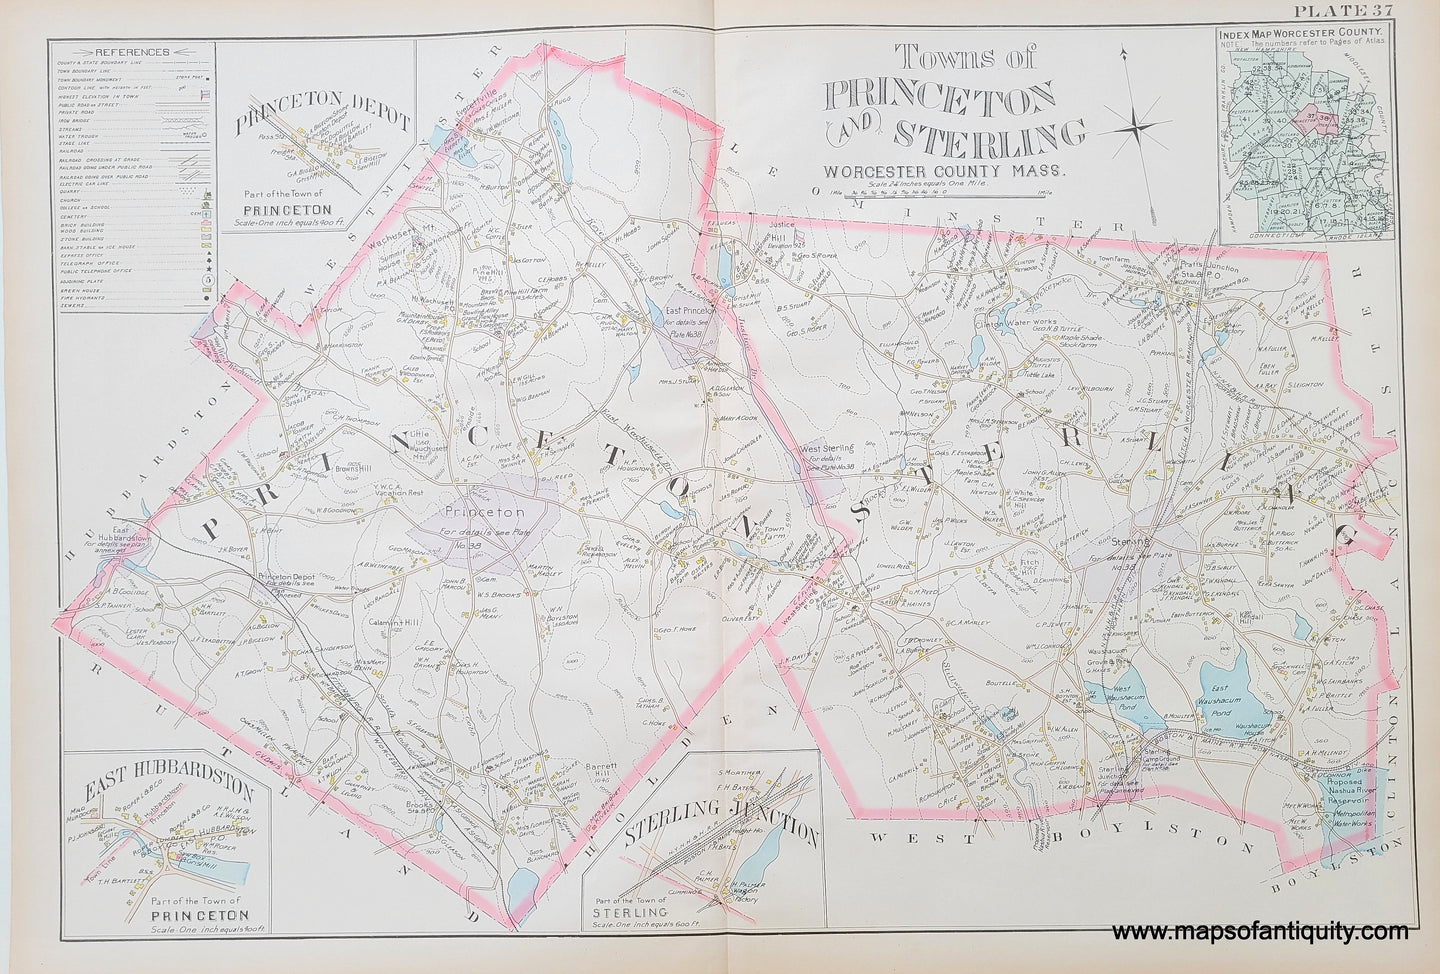 Antique-Map-Towns-of-Princeton-and-Sterling-Plate-37-1898-Worcester-County-Massachusetts-Richards